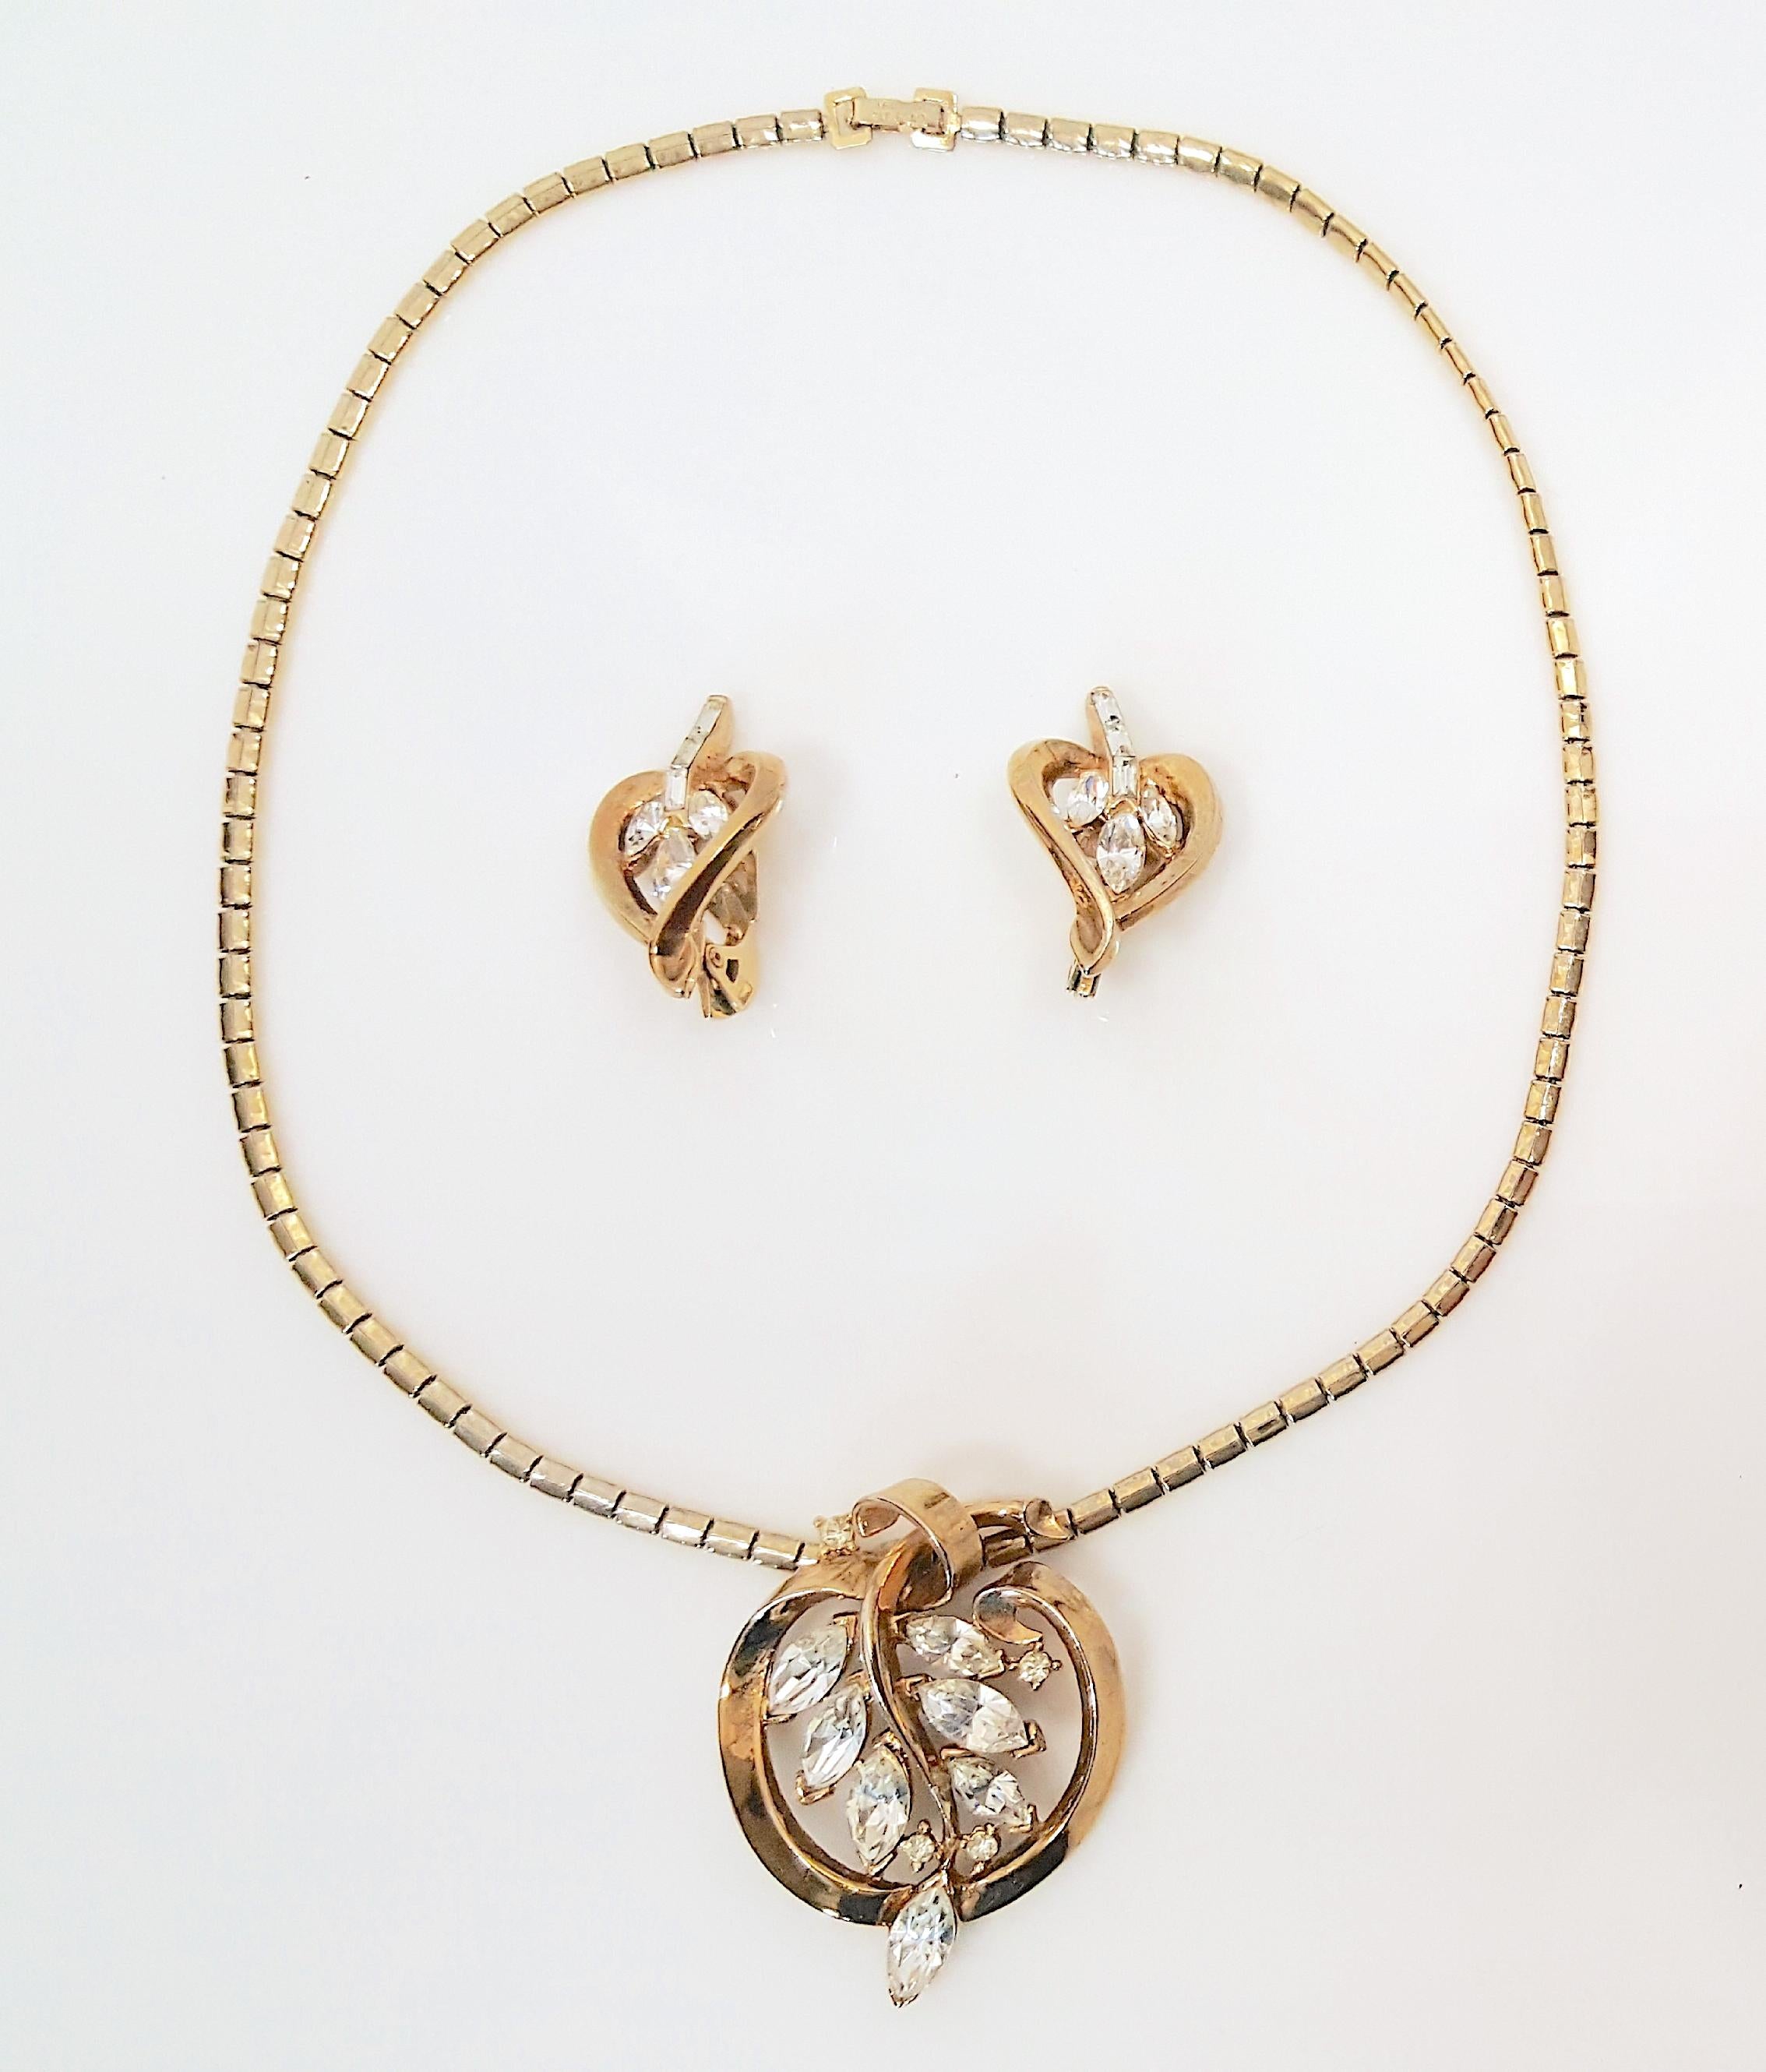 CrownTrifari 1940s Philippe RareParure InvisiblySetCrystal EarringBroochNecklace For Sale 5